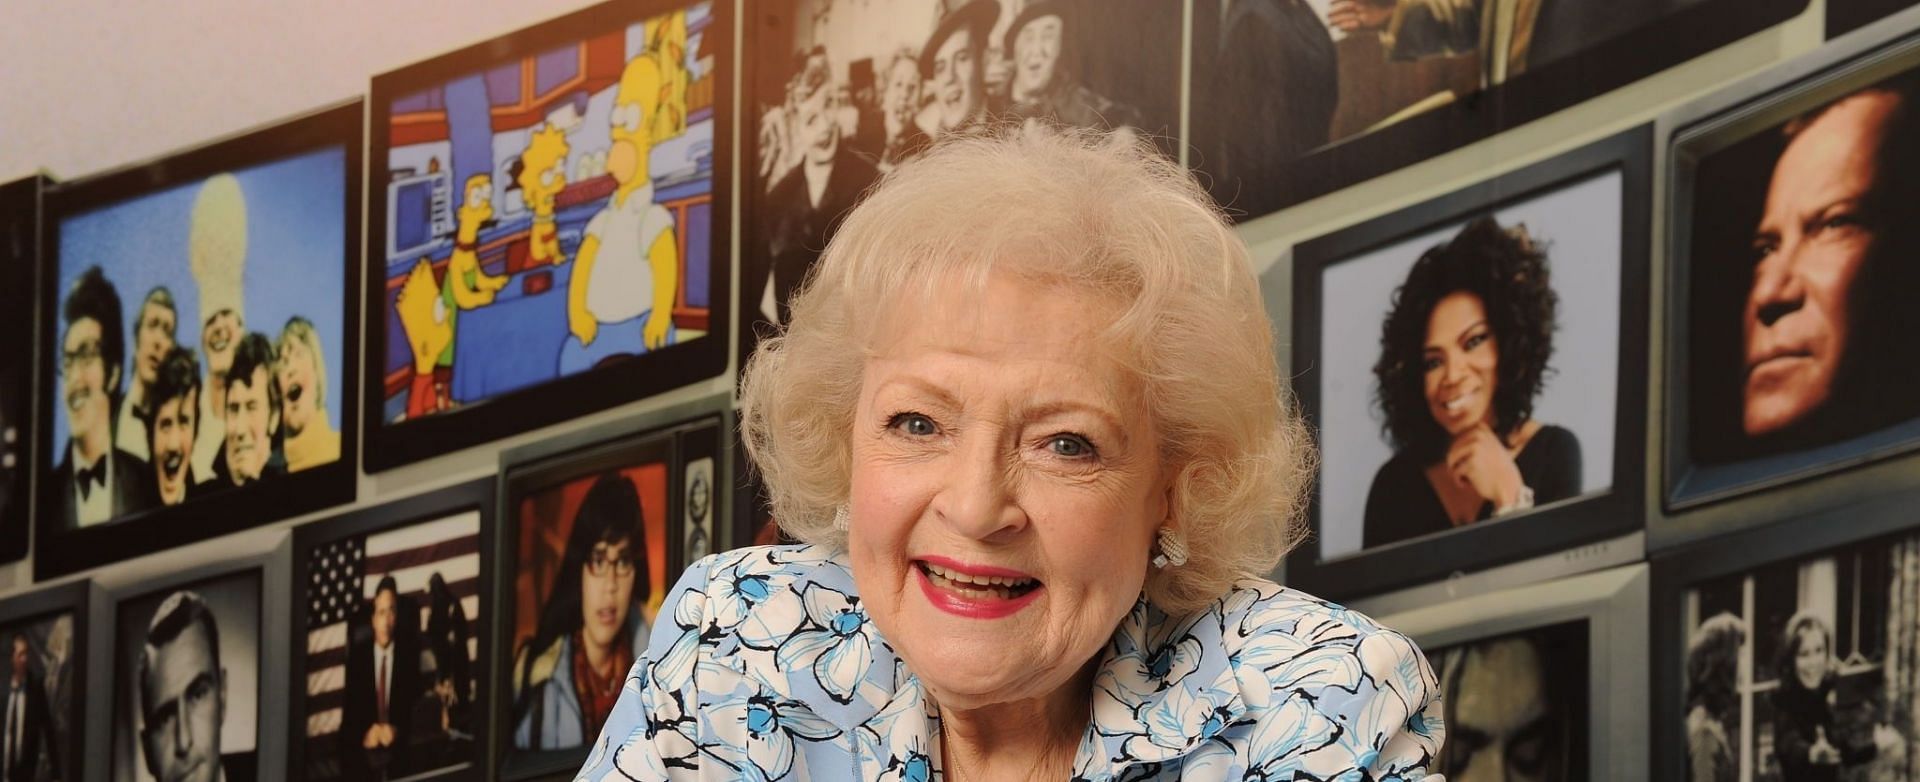 Betty White passed away due to natural causes at the age of 99 (Image via Bob Riha, Jr./Getty Images)